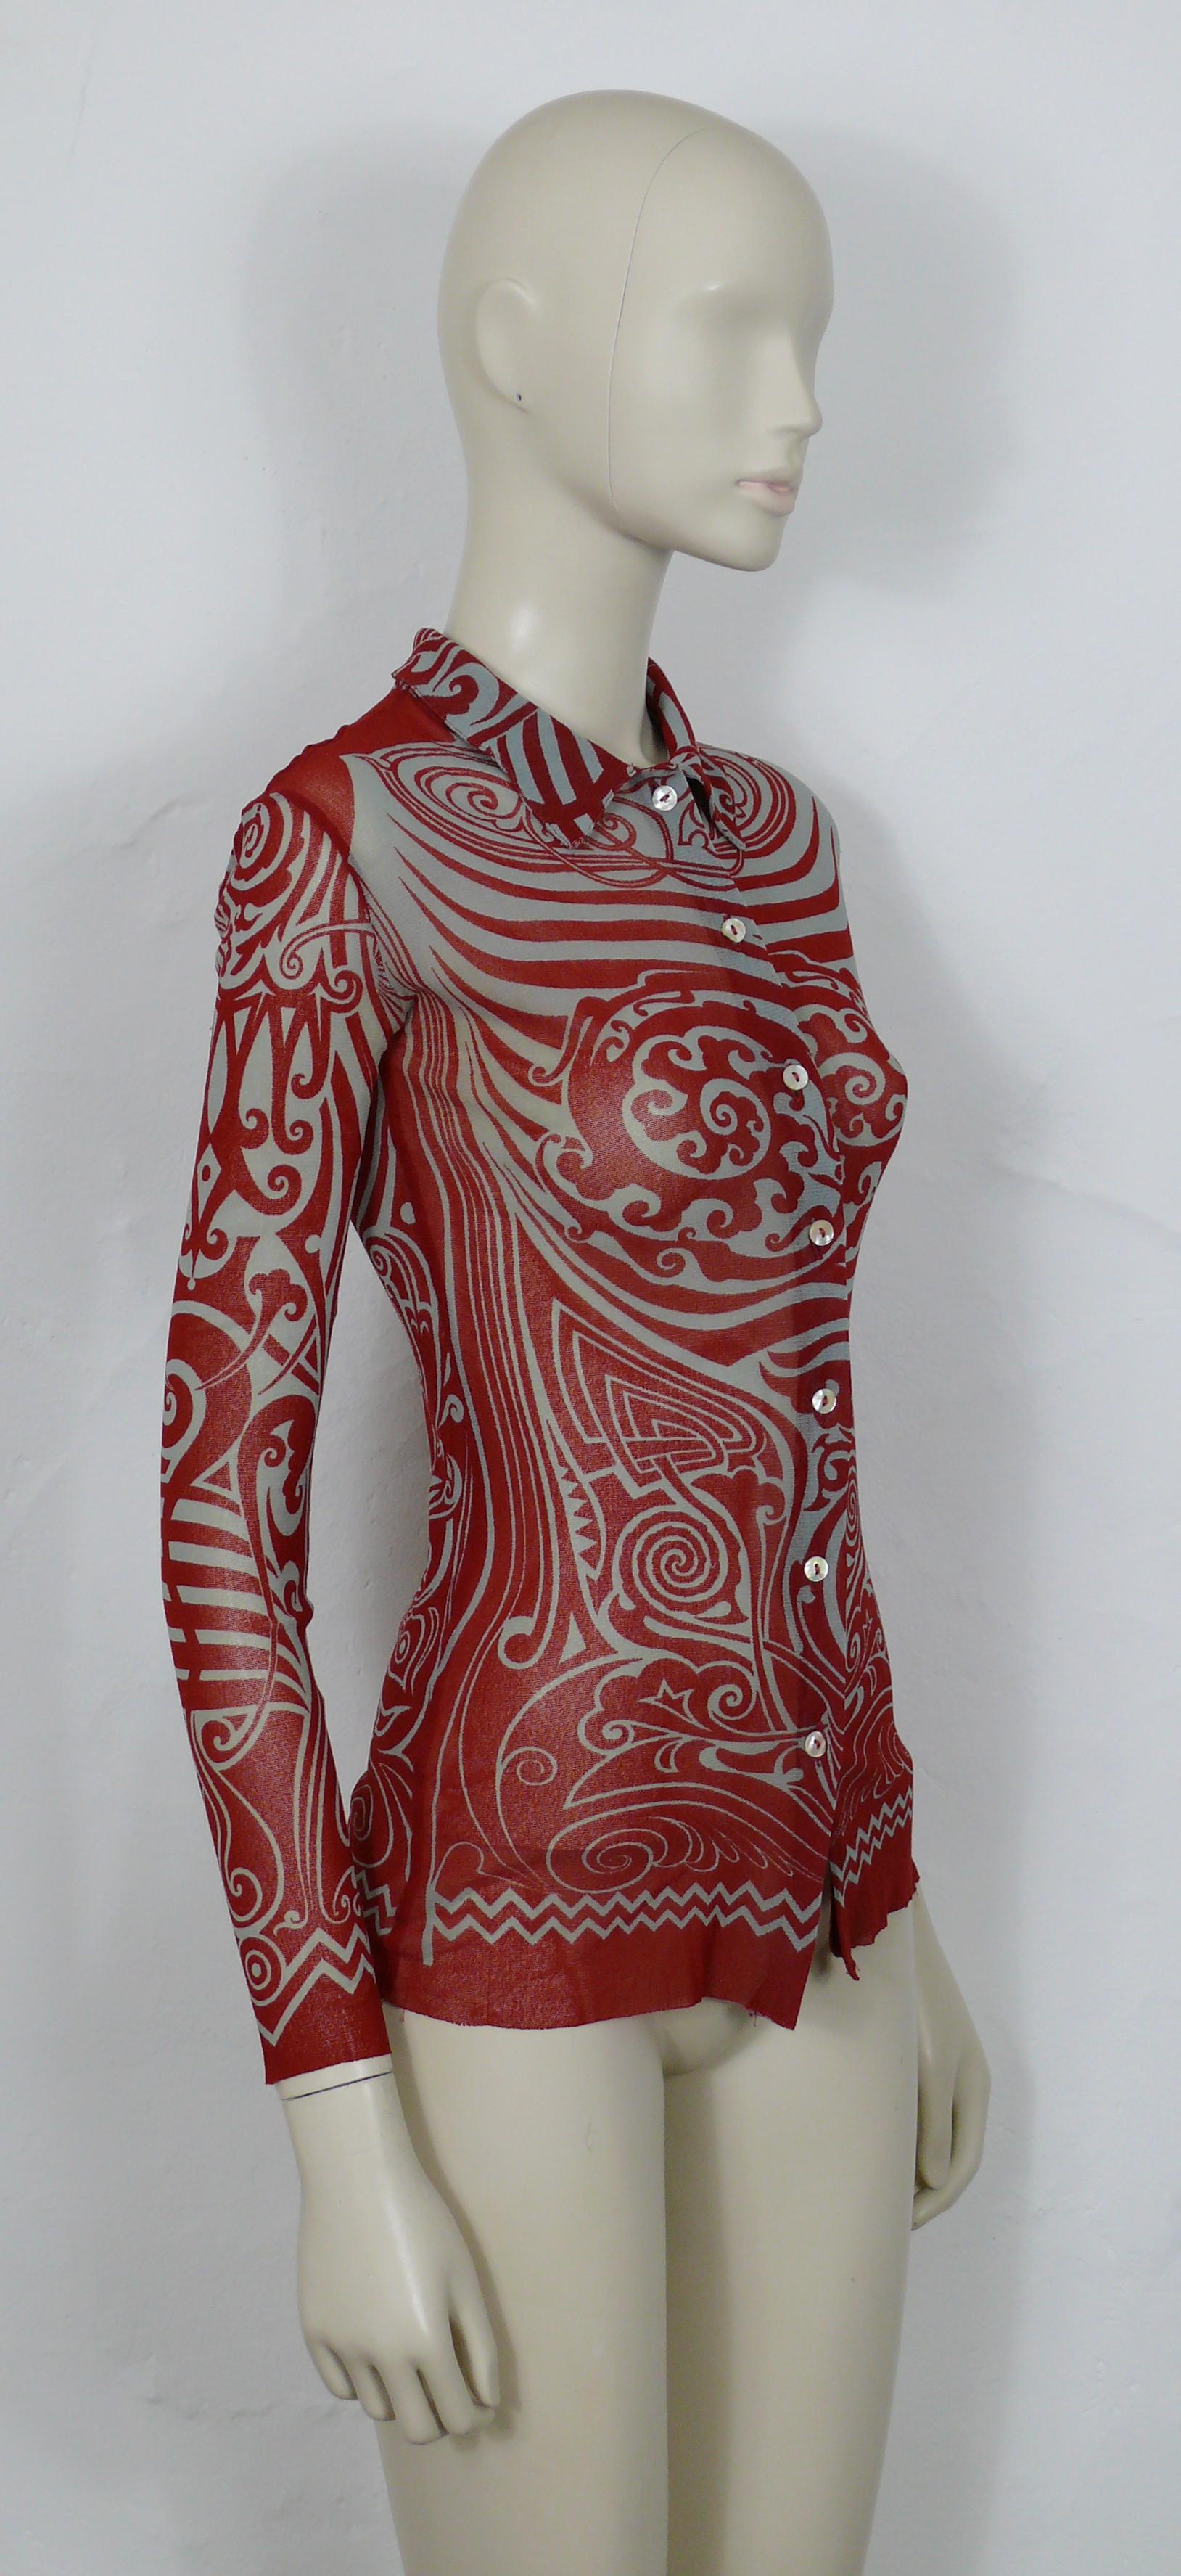 JEAN PAUL GAULTIER vintage 1996 FUZZI sheer mesh shirt featuring a red tribal tattoo print all-over.

Label reads JEAN PAUL GAULTIER MAILLE.
Made in Italy.

Missing size label.
Please refer to measurements.

Missing composition tag (supposed 100%